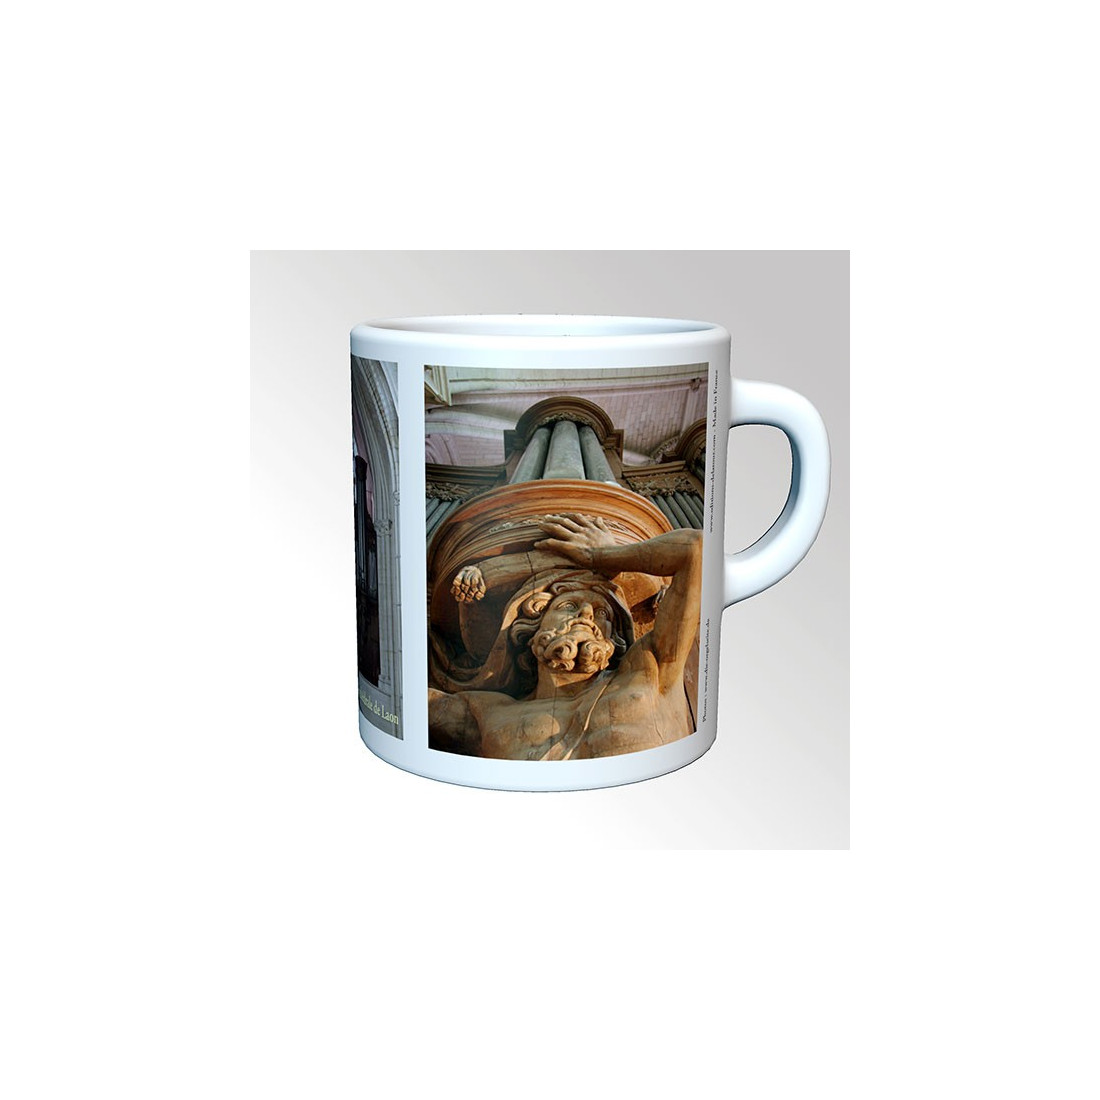 Mug Henri Didier of the Cathedral in Laon - 2 - (France) 